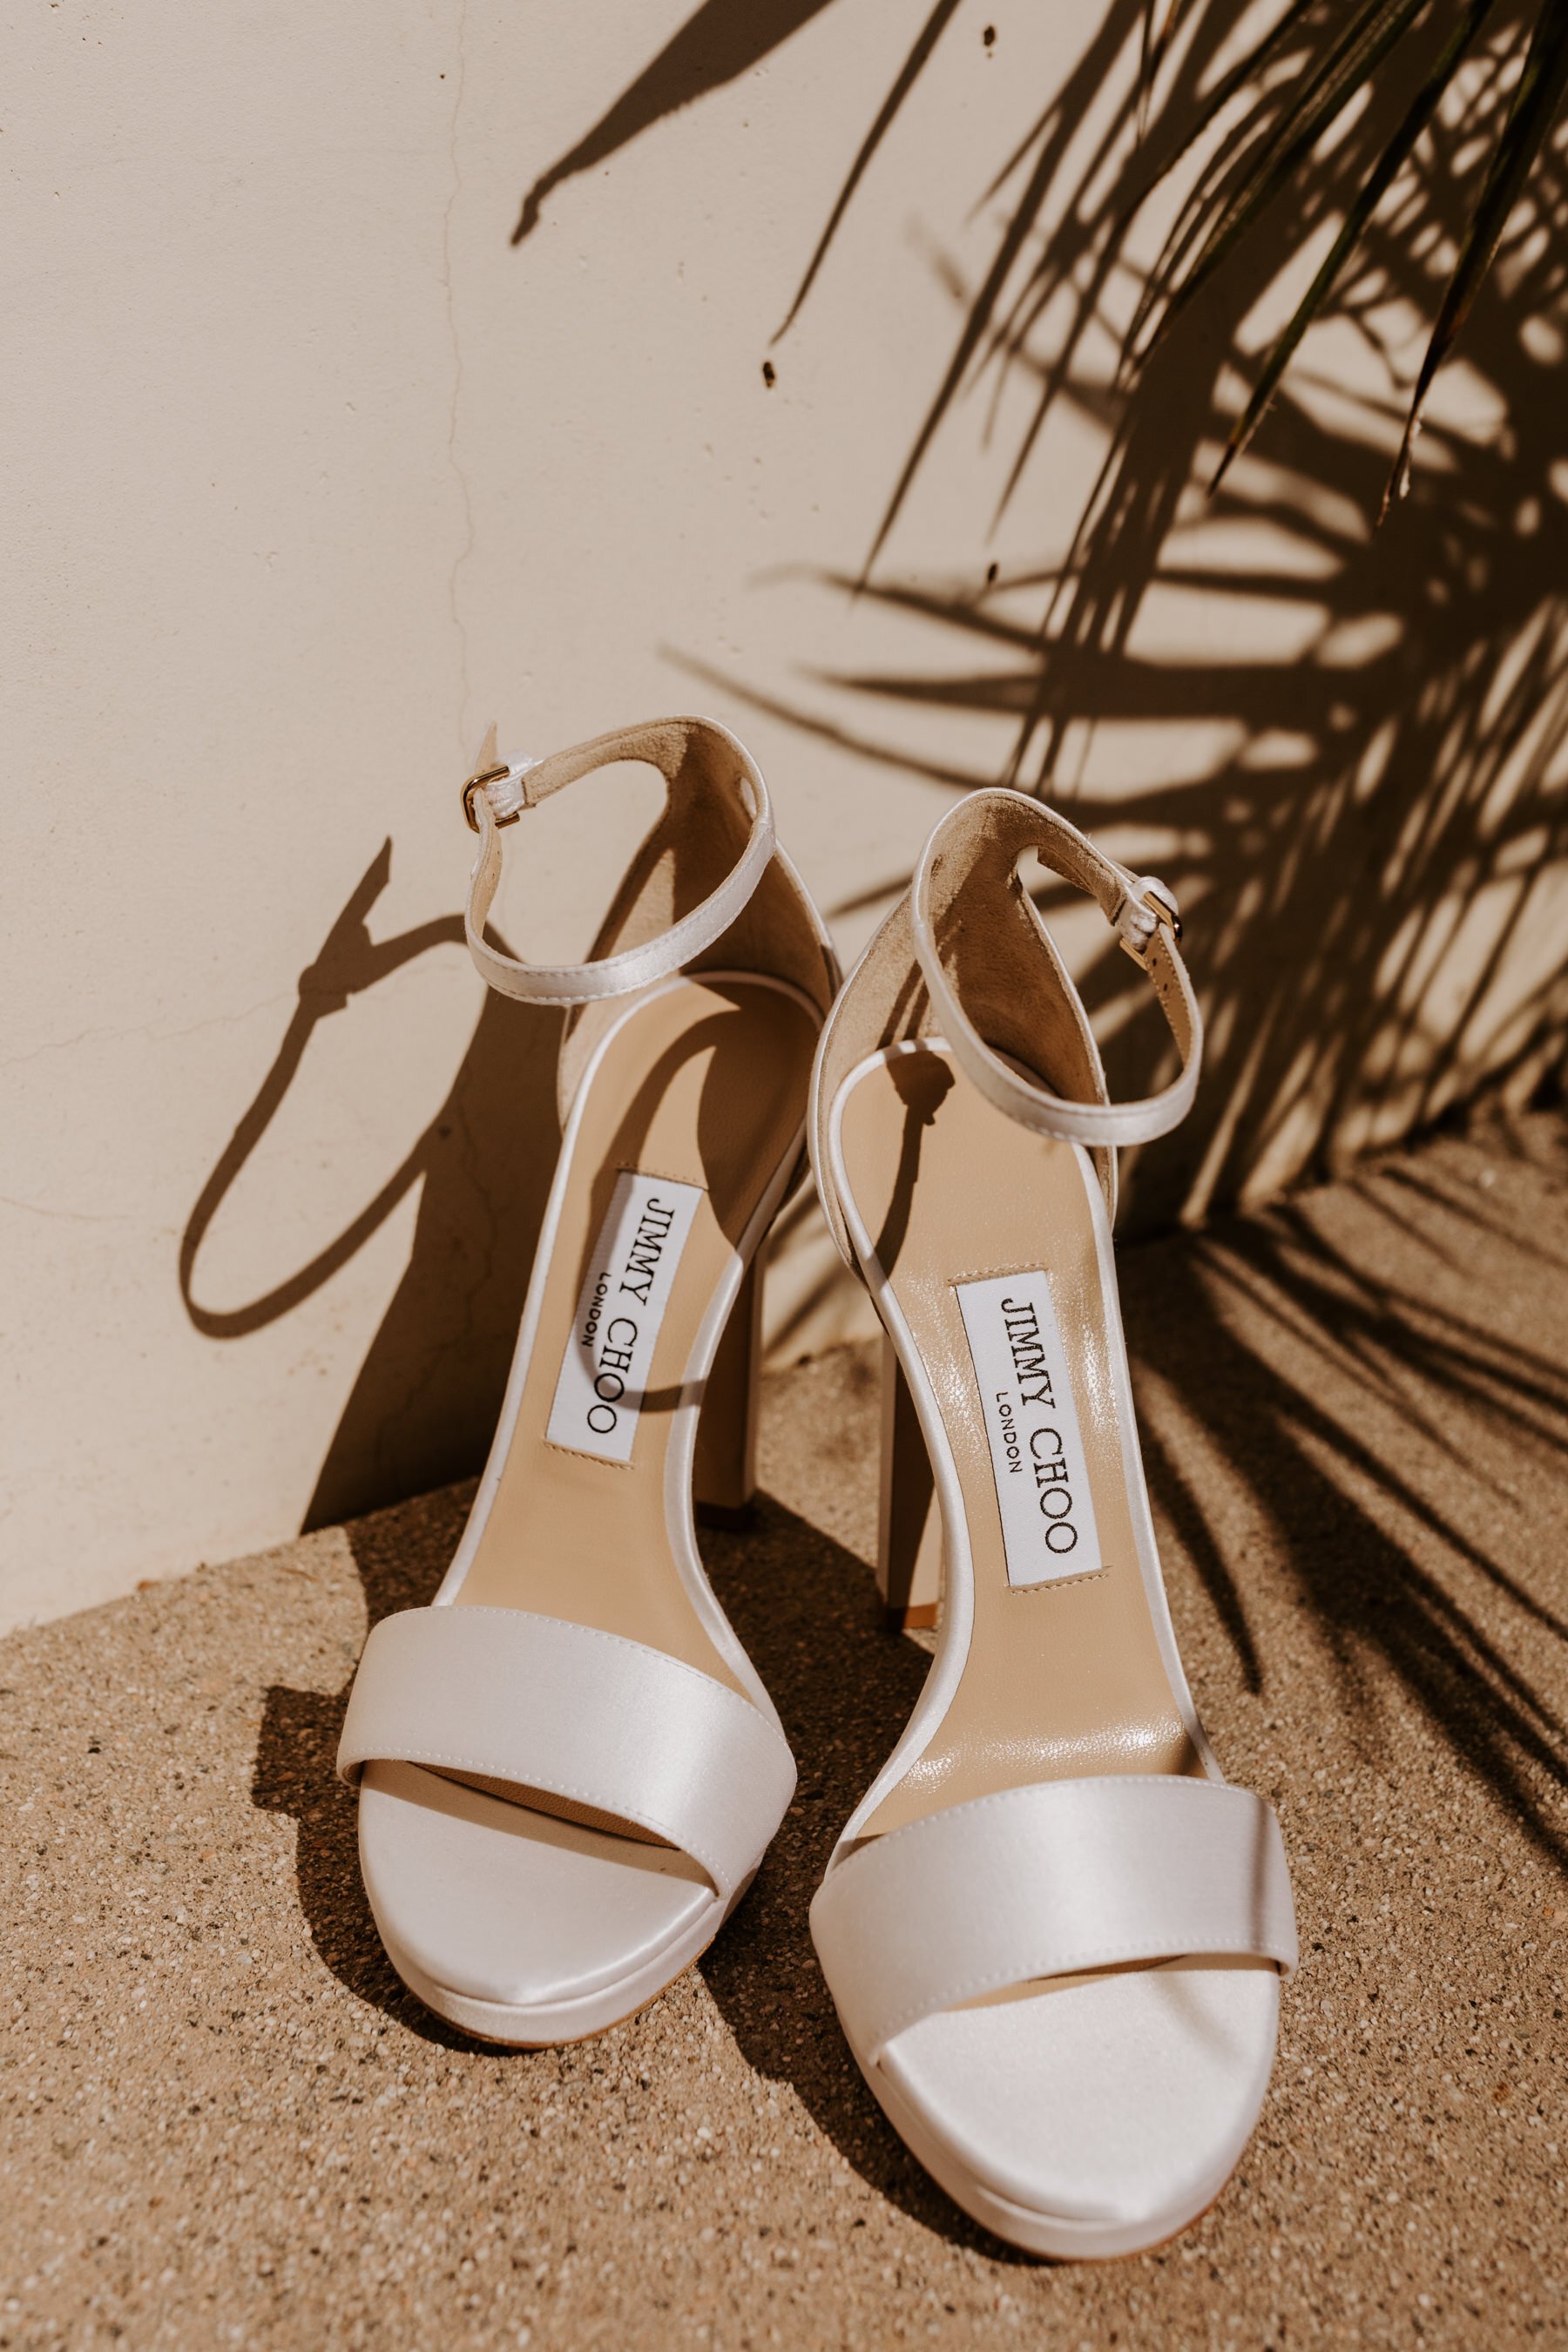 Custom white Jimmy Choo wedding shoes with last name engraved, Wedding Getting Ready at La Serena Villas Palm Springs, Palm Springs Wedding Photographer